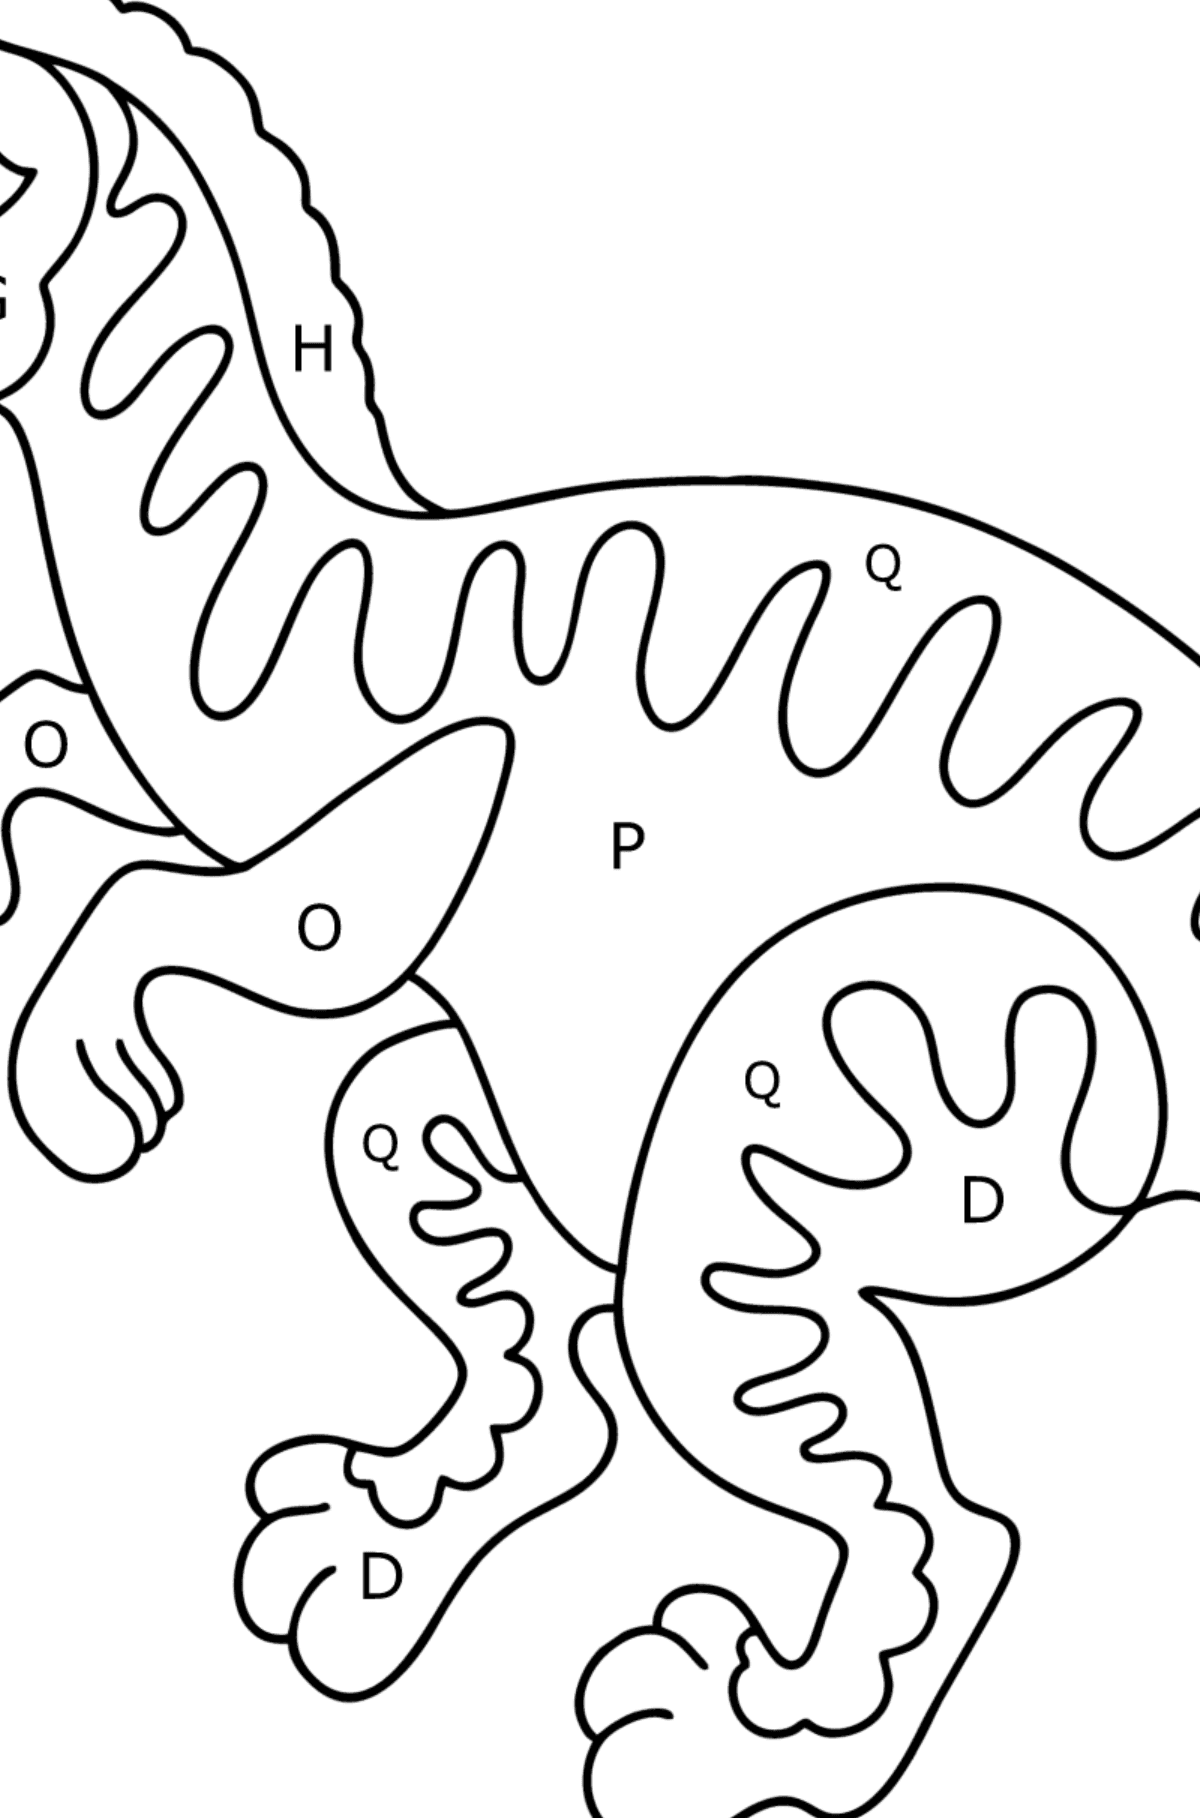 Velociraptor coloring page - Coloring by Letters for Kids